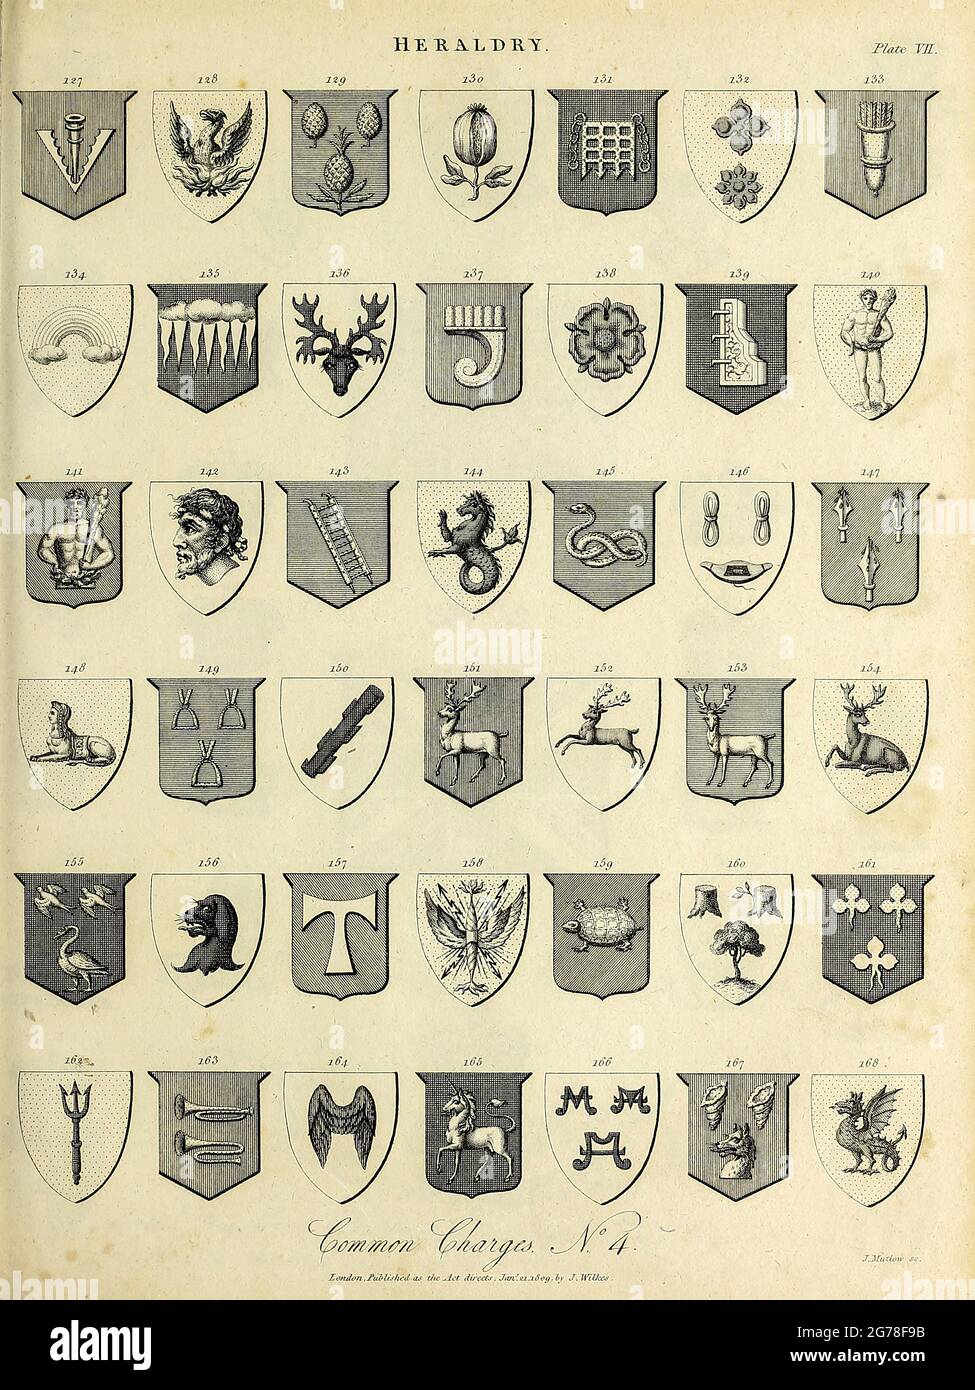 Common Charges, Heraldry is a discipline relating to the design, display and study of armorial bearings (known as armory), as well as related disciplines, such as vexillology, together with the study of ceremony, rank and pedigree. Armory, the best-known branch of heraldry, concerns the design and transmission of the heraldic achievement. The achievement, or armorial bearings usually includes a coat of arms on a shield, helmet and crest, together with any accompanying devices, such as supporters, badges, heraldic banners and mottoes. Copperplate engraving From the Encyclopaedia Londinensis or, Stock Photo